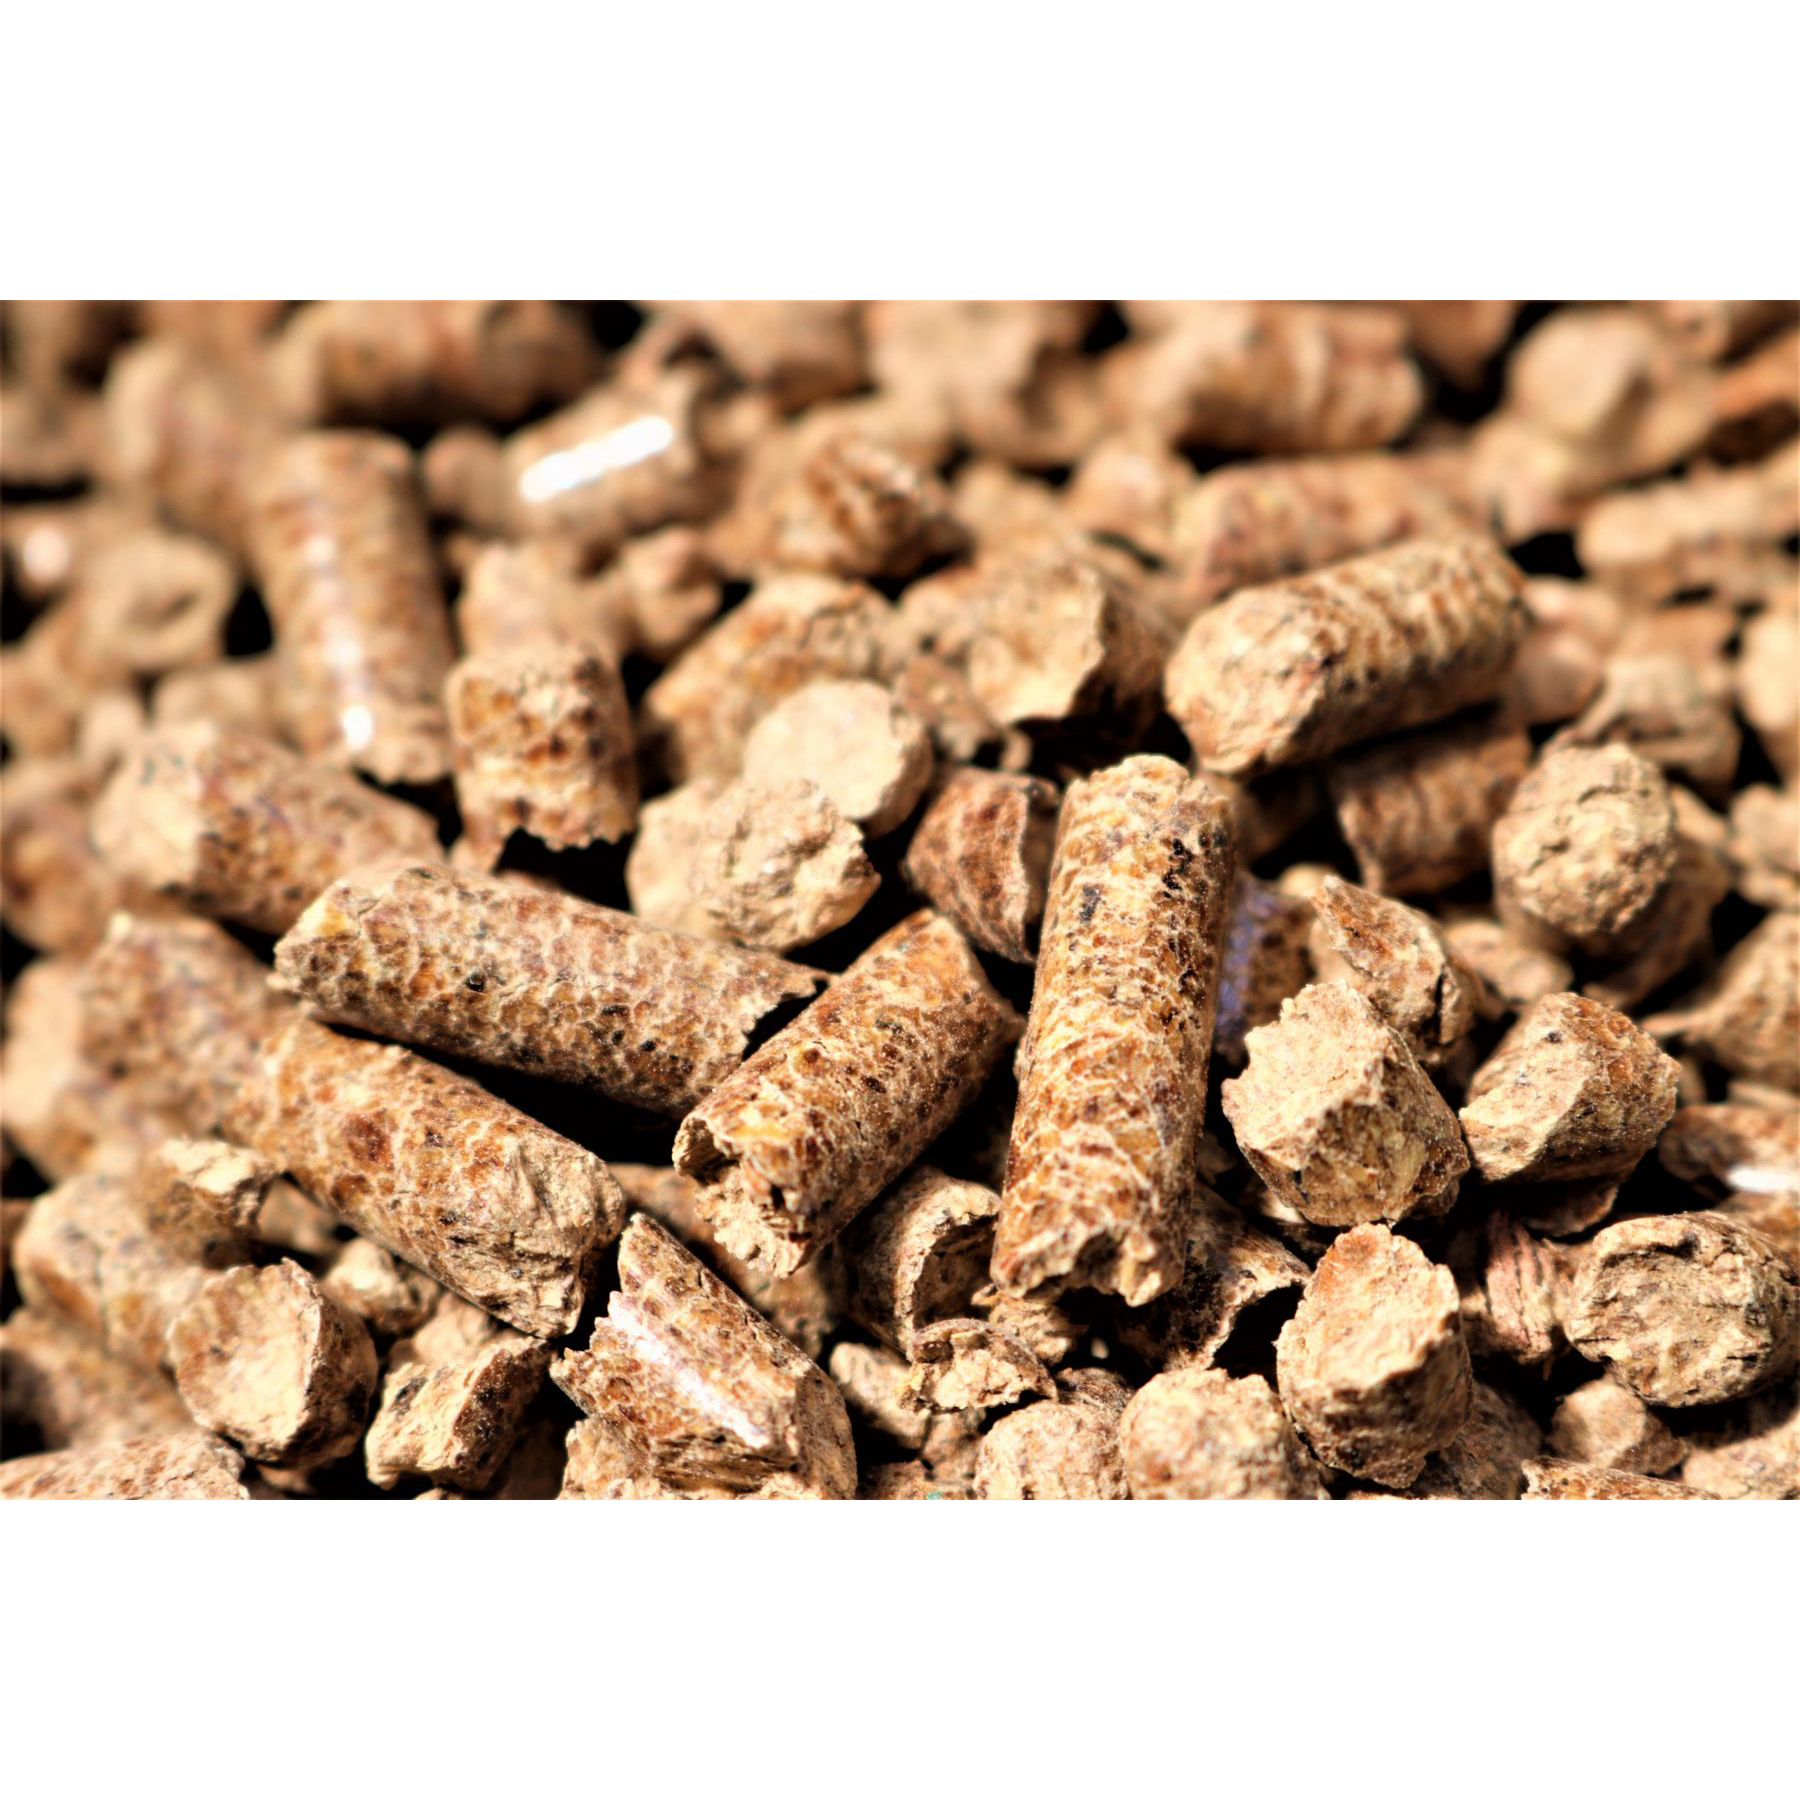 Bear Mountain BBQ 100% Natural Hardwood Maple Flavor Pellets, 20 Pounds - image 4 of 6